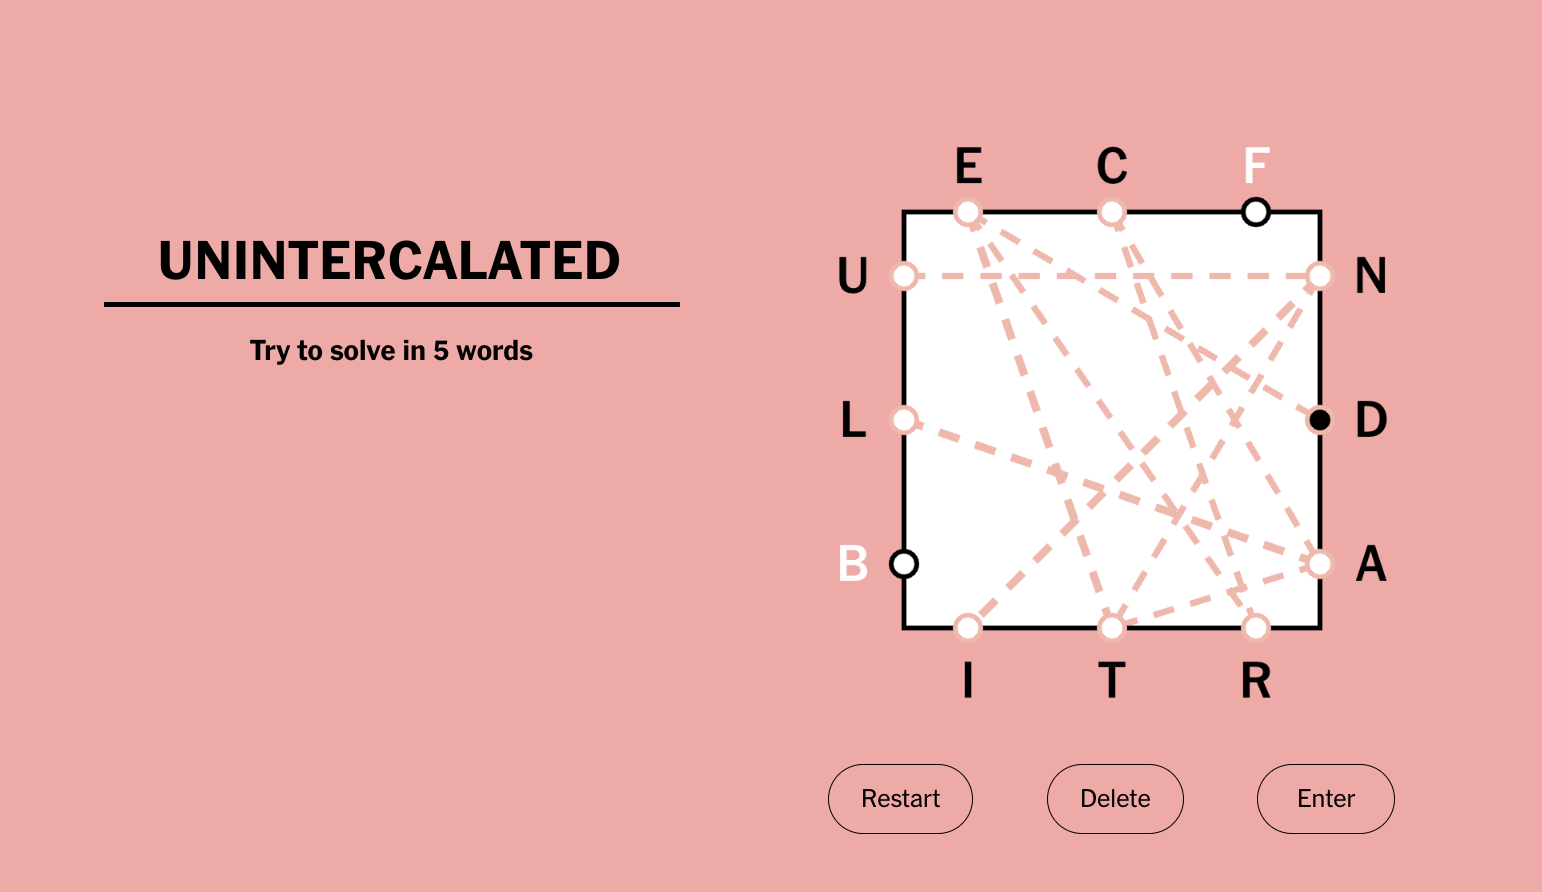 "unintercalated" is the longest word that fits the puzzle